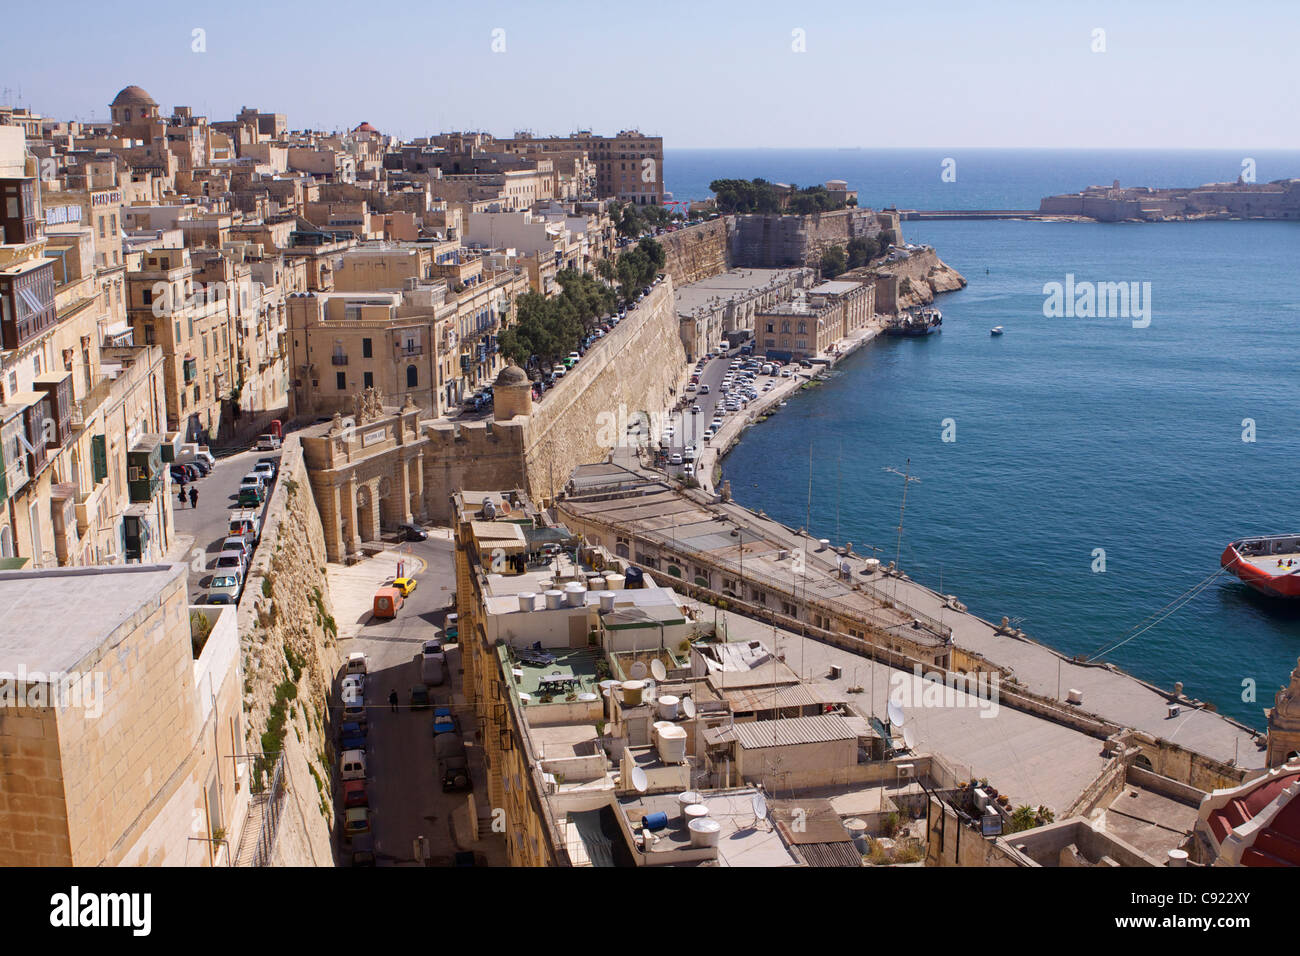 View over the Barriera wharf and the Victoria Gate in Valletta looking towards the entrance from the Mediterranean sea to the Stock Photo